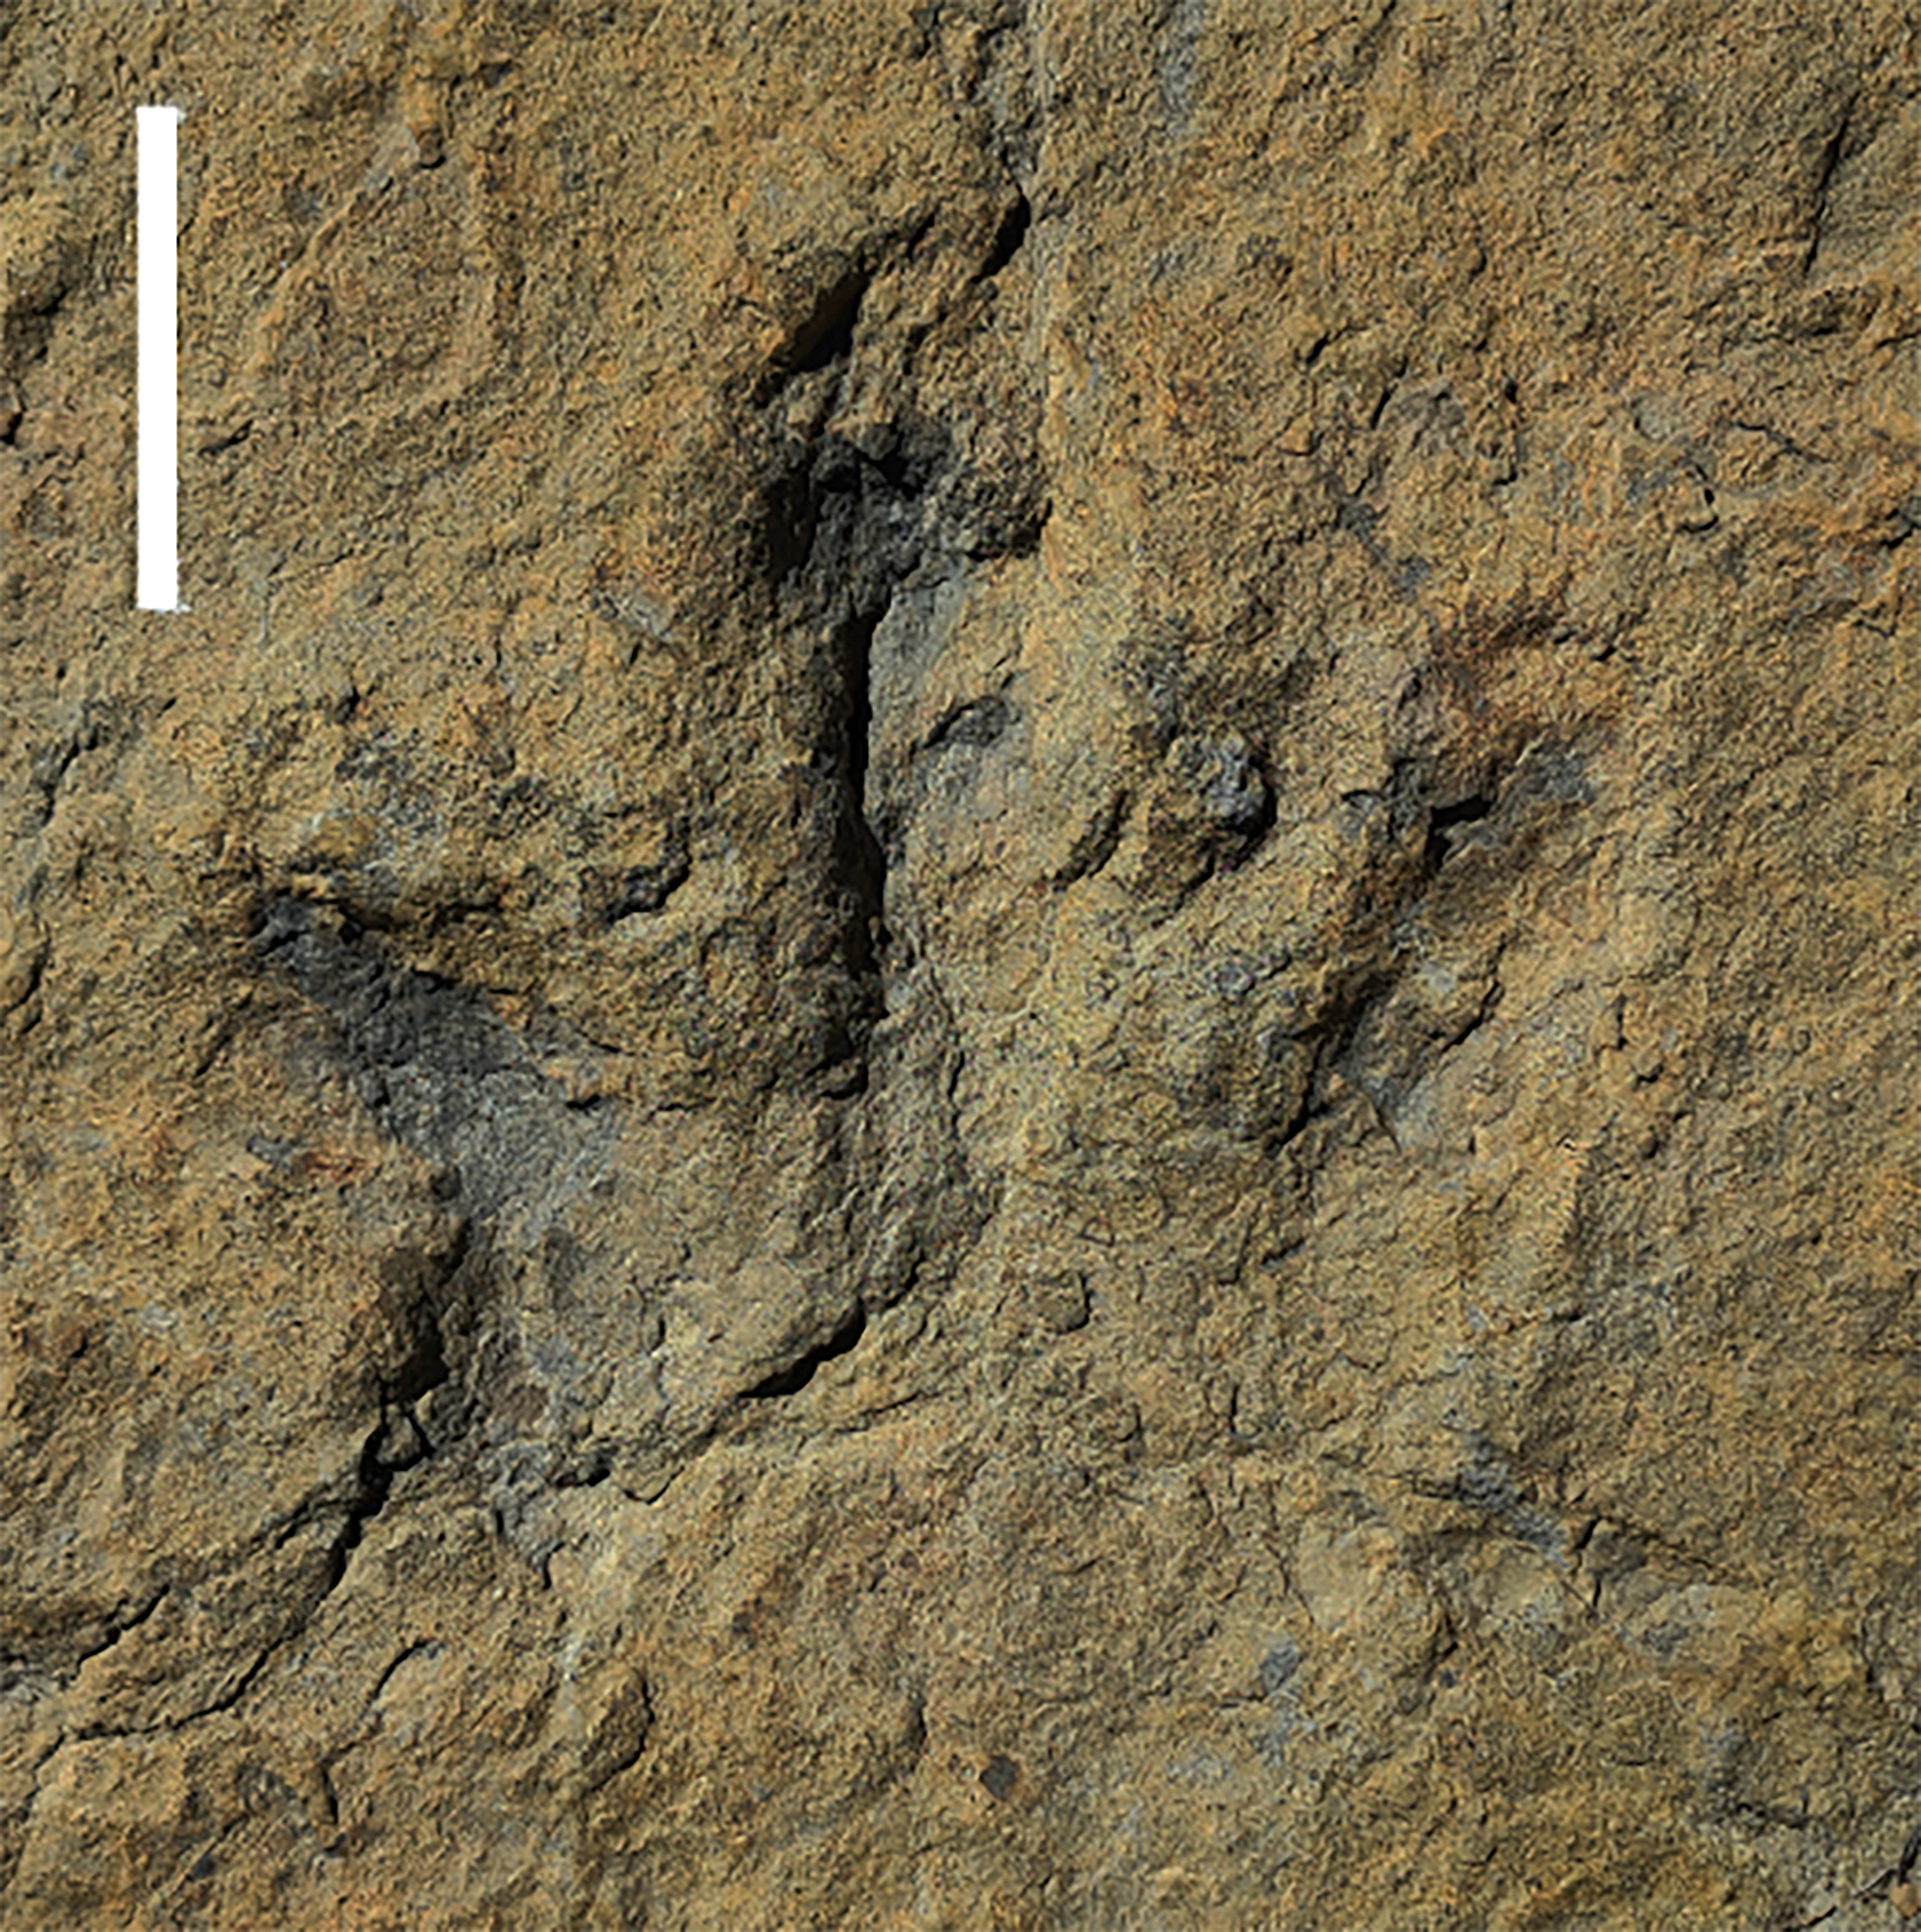 A fossilized dinosaur footprint made about 120 million years ago during the Cretaceous Period